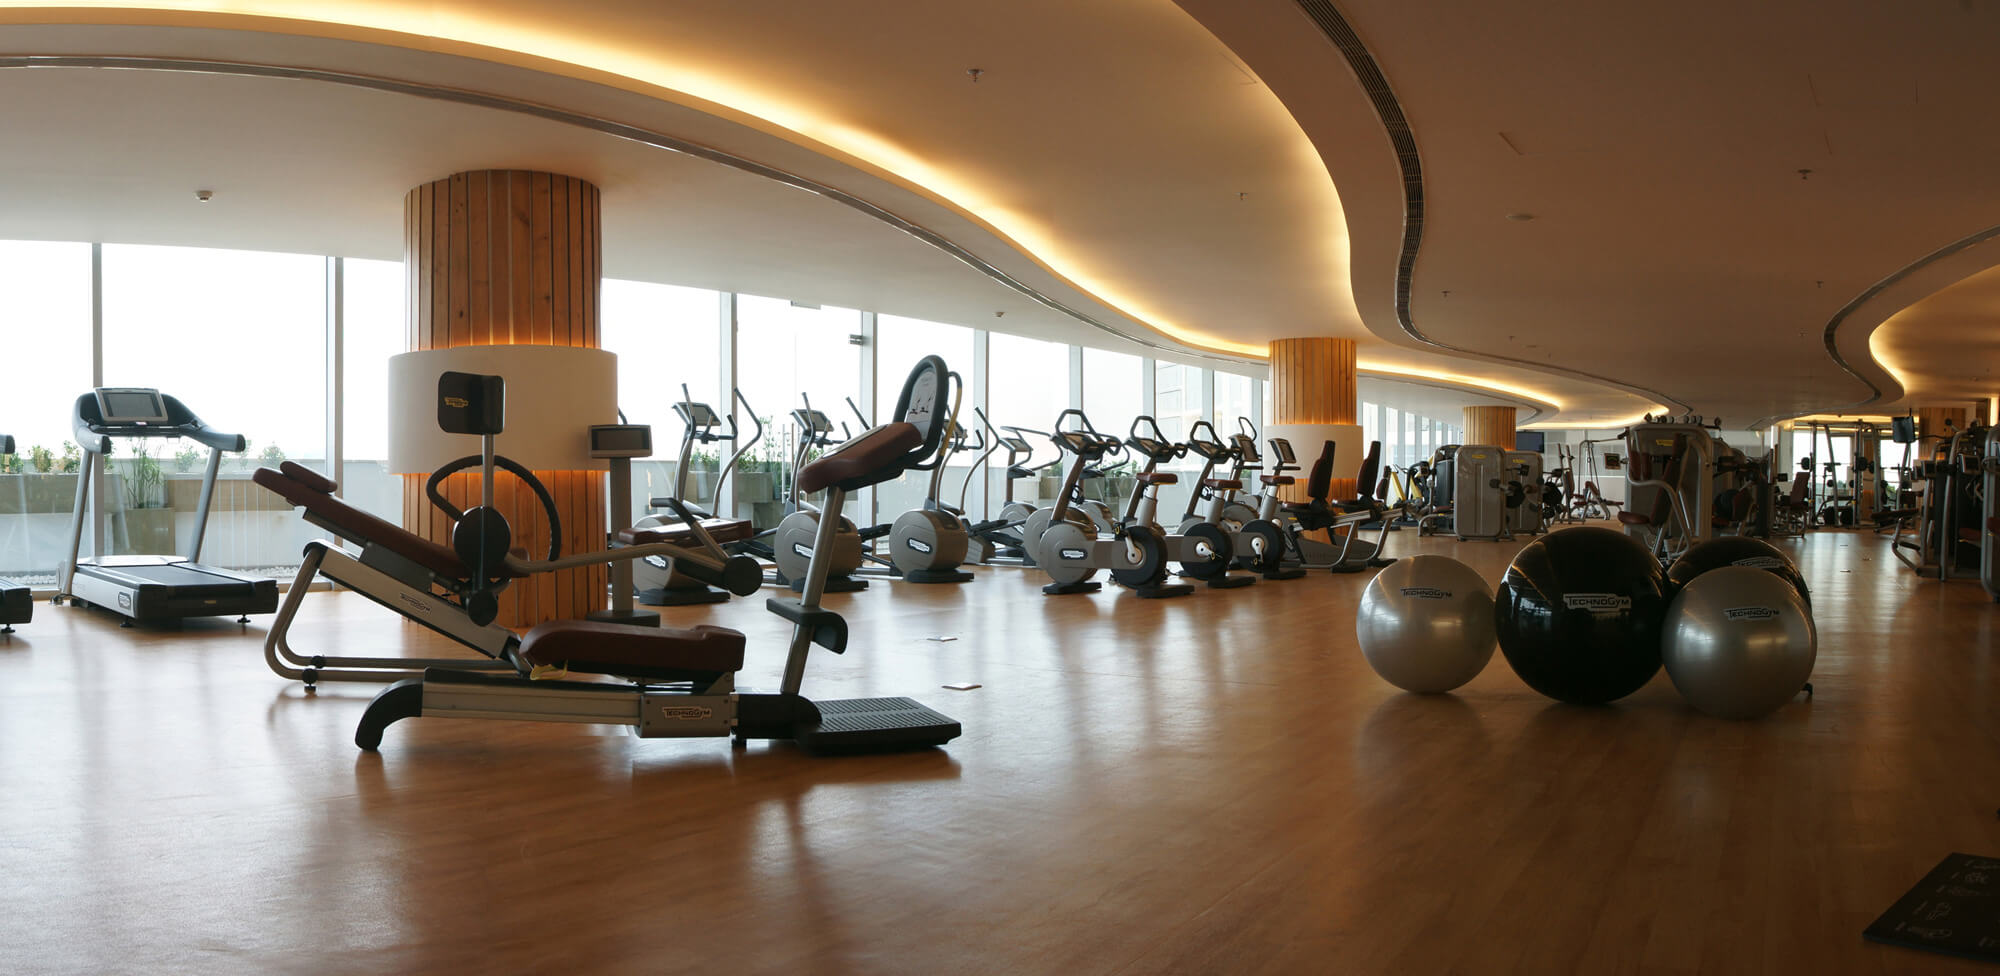 A view inside the California fitness center at the Crescent Plaza building in District 7, Ho Chi Minh City. Photo: California Fitness and Yoga